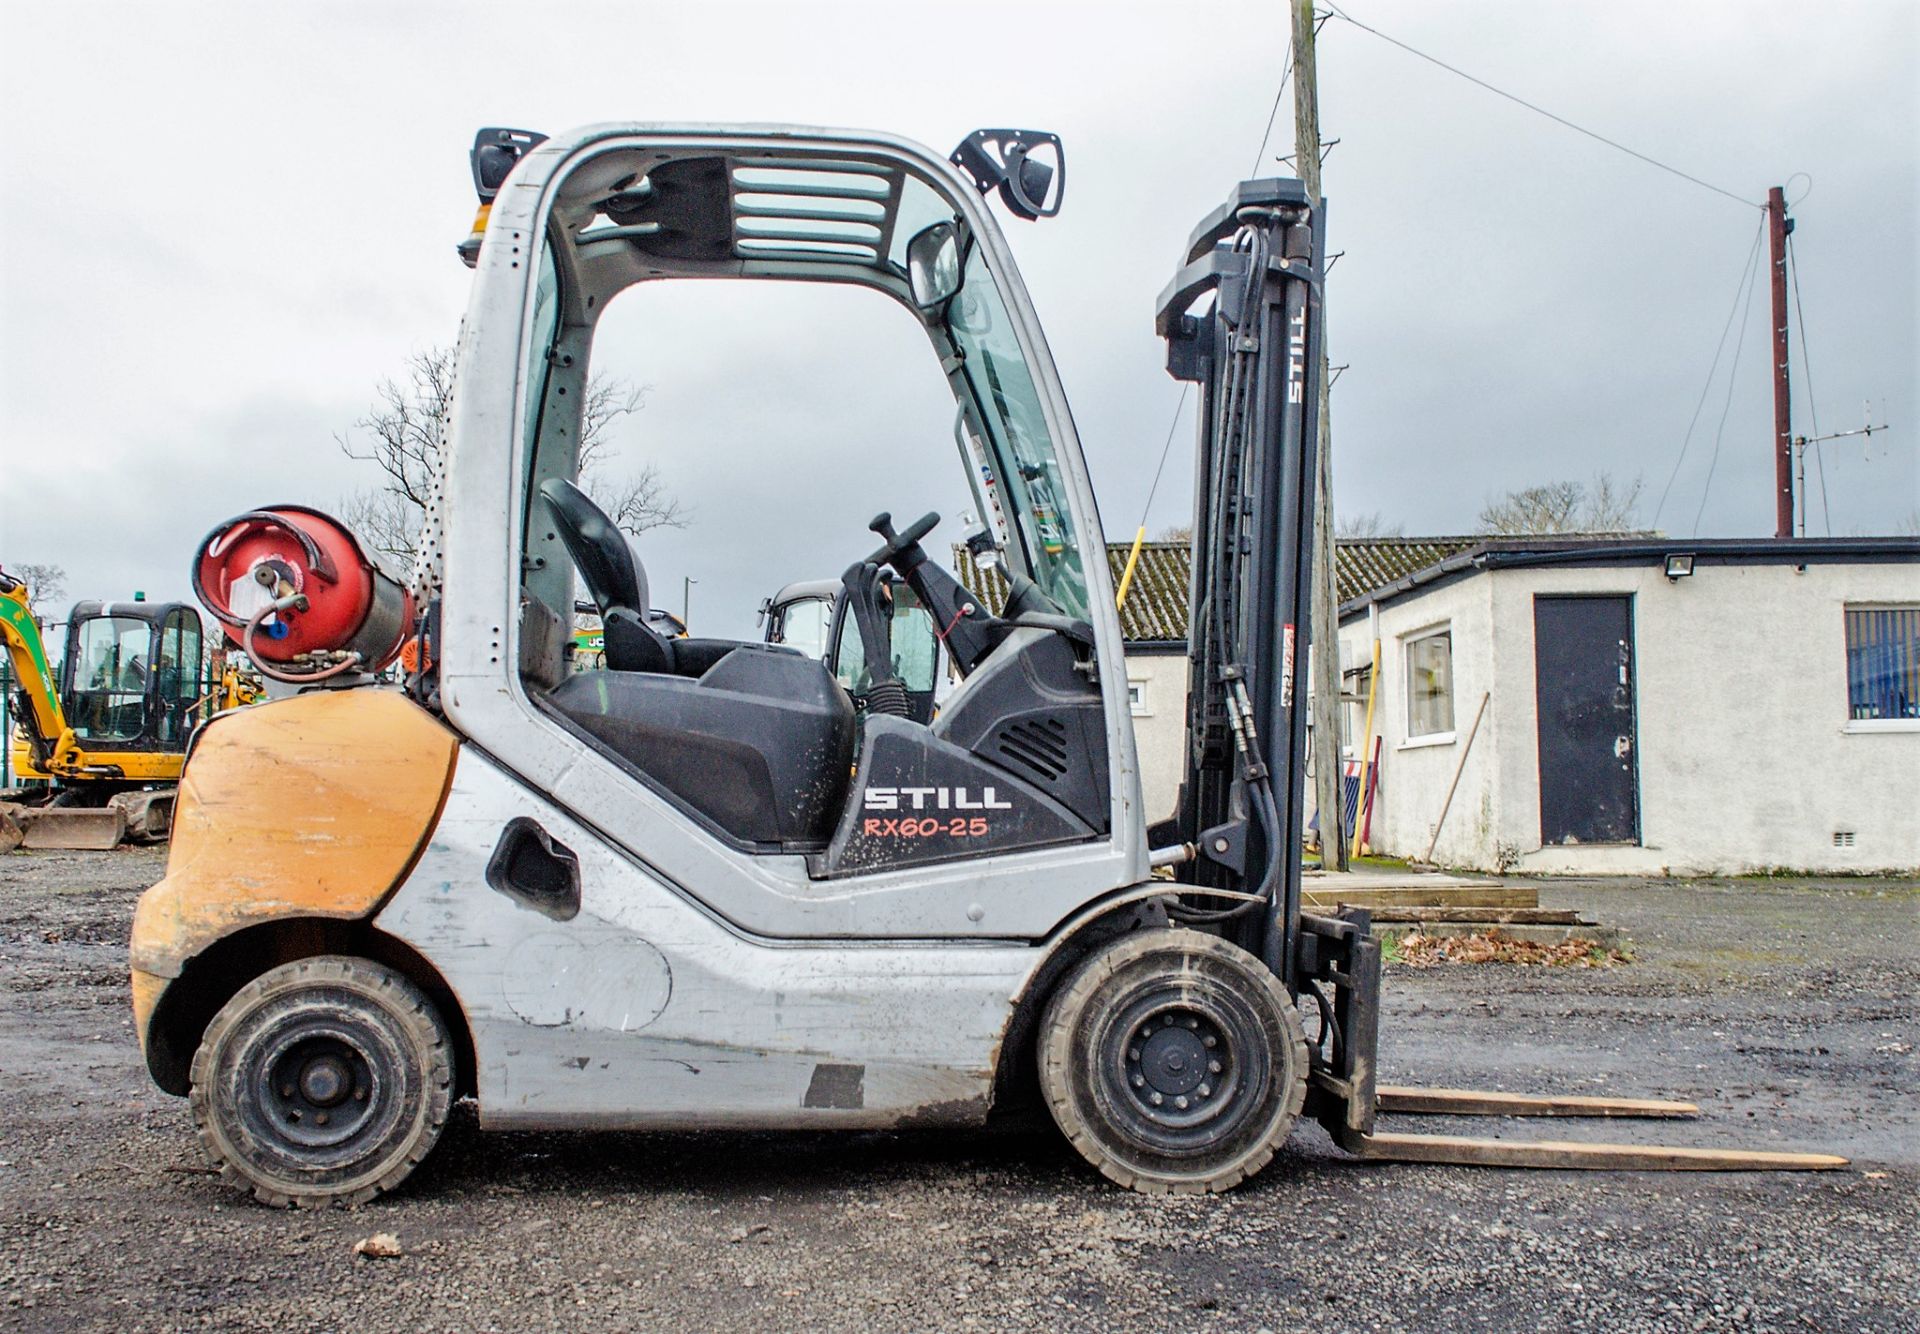 Still RX60-25 2.5 tonne gas powered fork lift truck Year: 2010 S/N: A00030 Recorded Hours: 10648 - Image 8 of 15